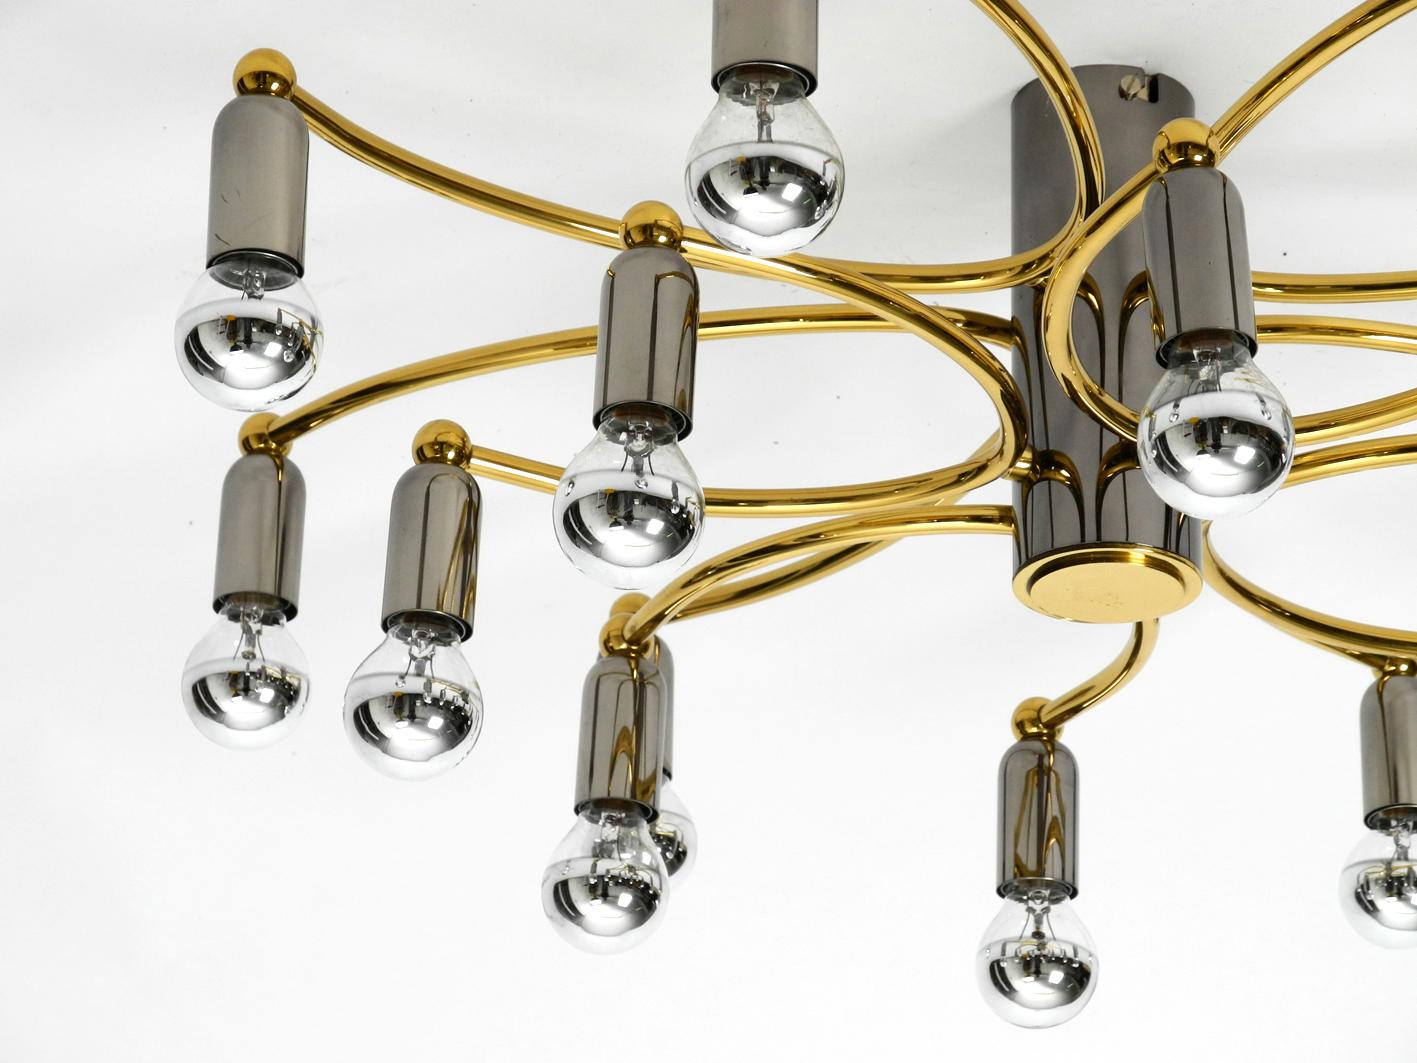 Metal 1980s 16-Armed Extra Large Ceiling Lamp by Cosack, Made of Brass and Chrome